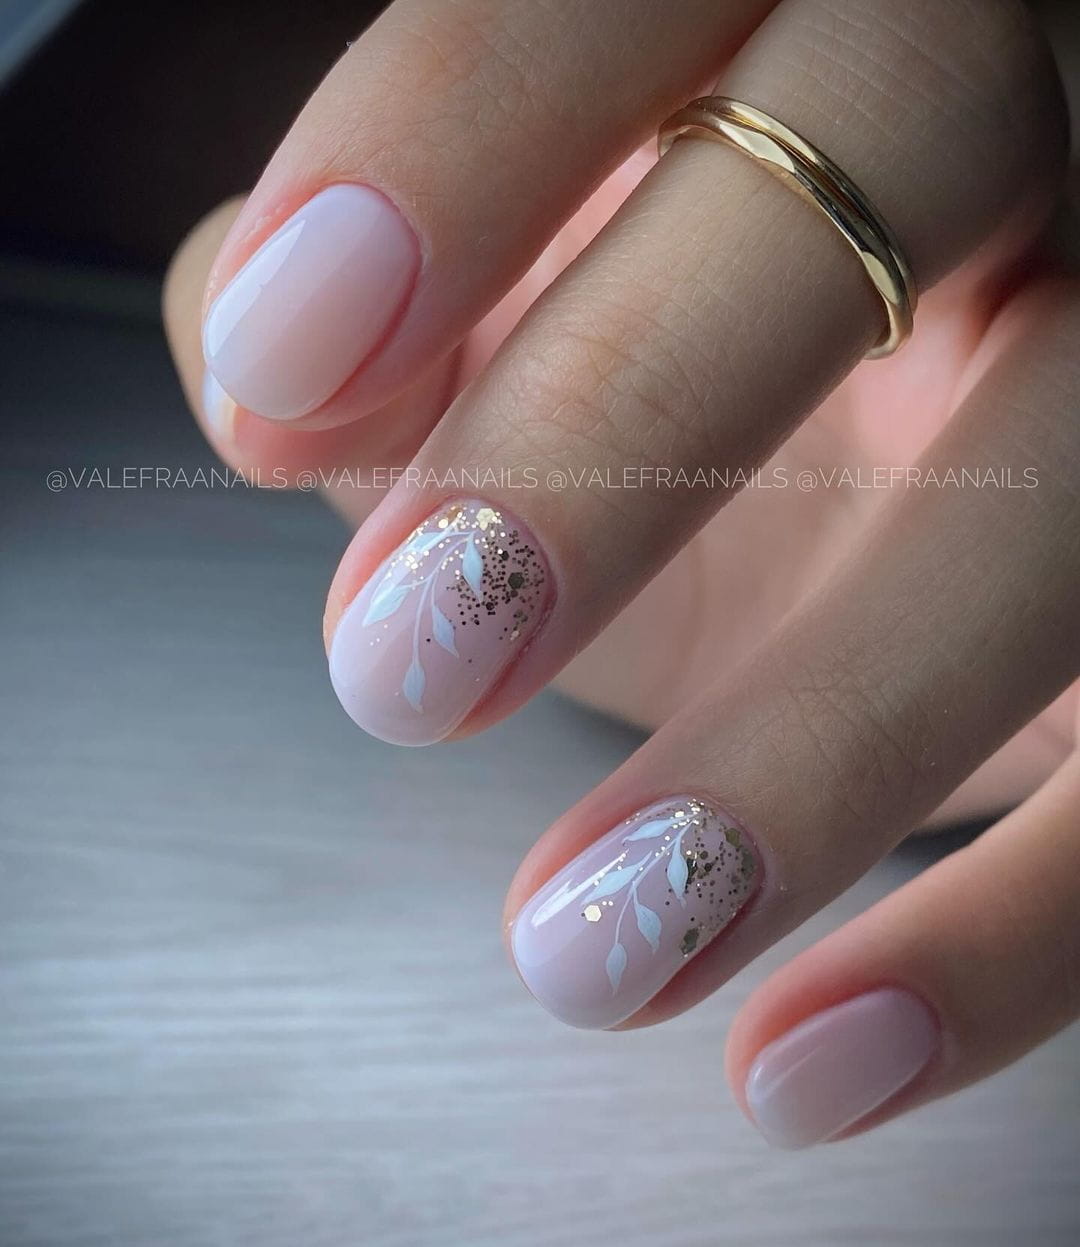 100+ Short Nail Designs You’ll Want To Try This Year images 2